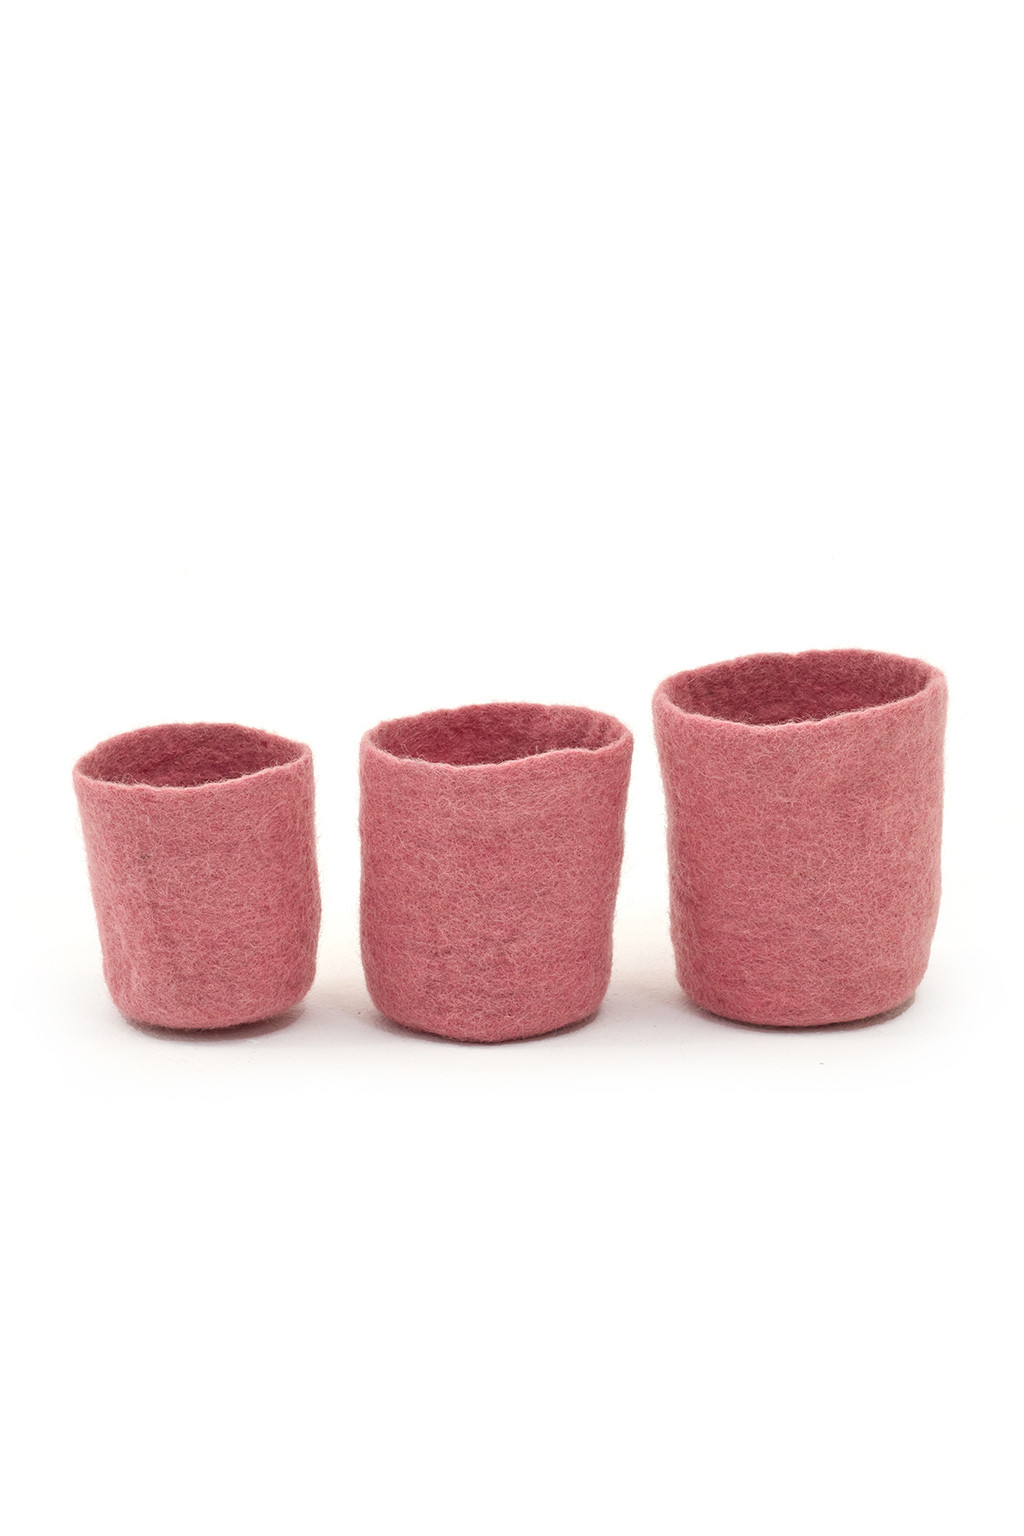 SMALL NESTED POTS - Last chance